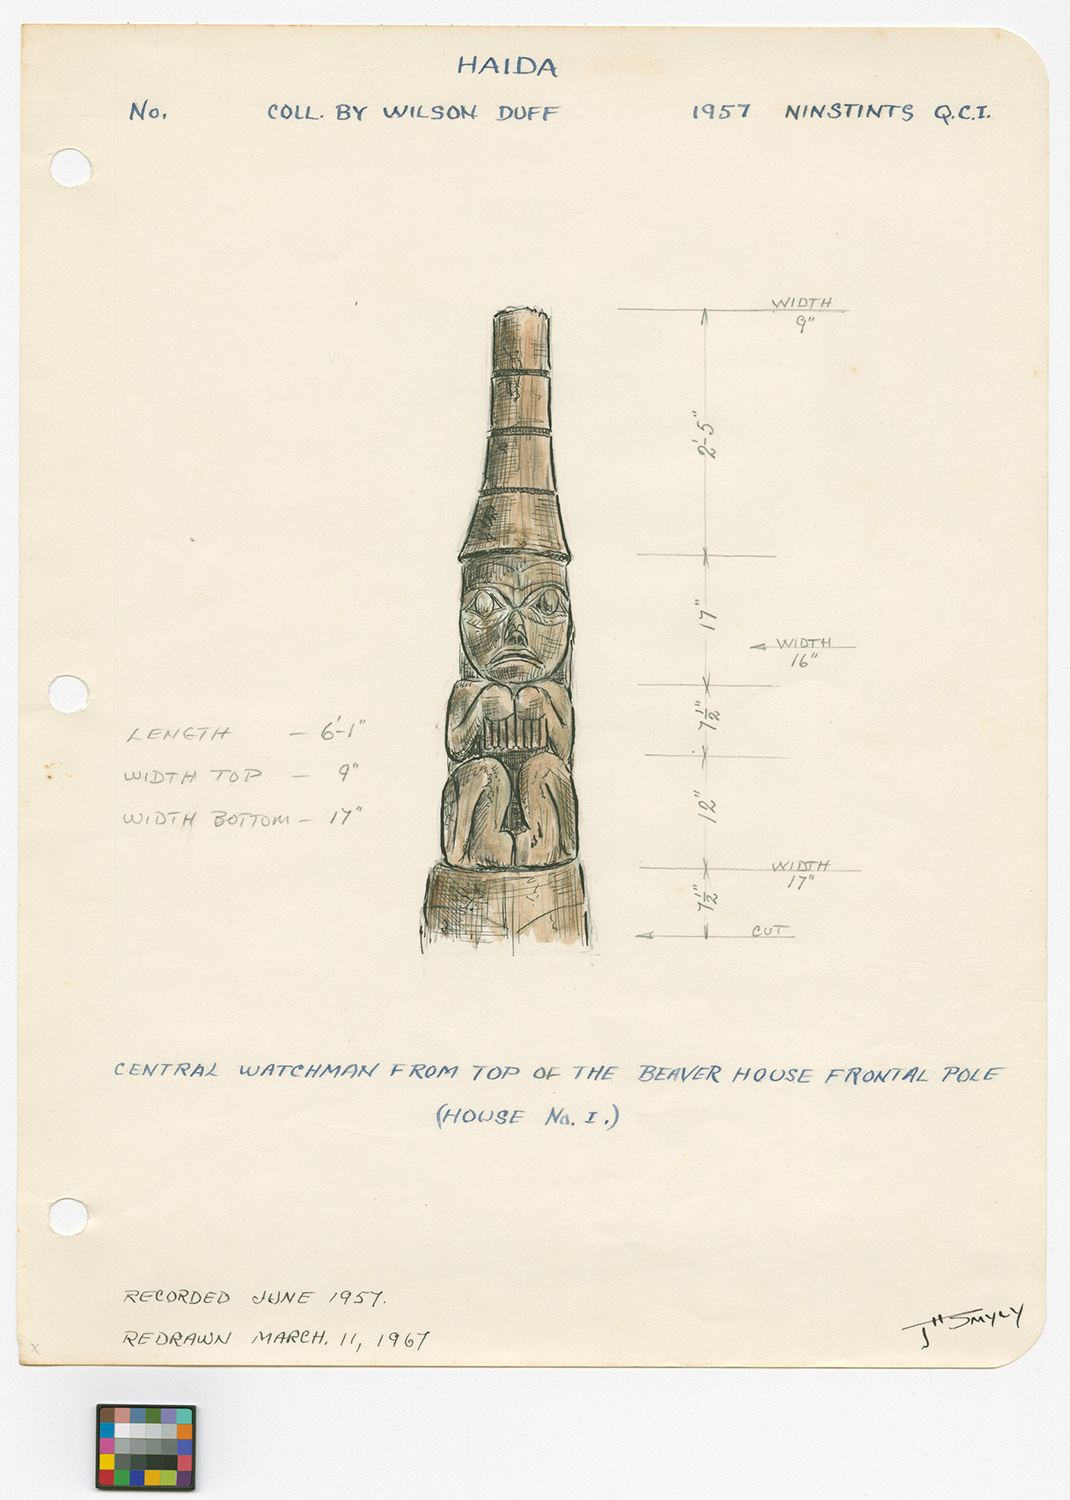 Pencil drawing and dimensions of the top of house frontal pole showing a watchman by John Smyly.